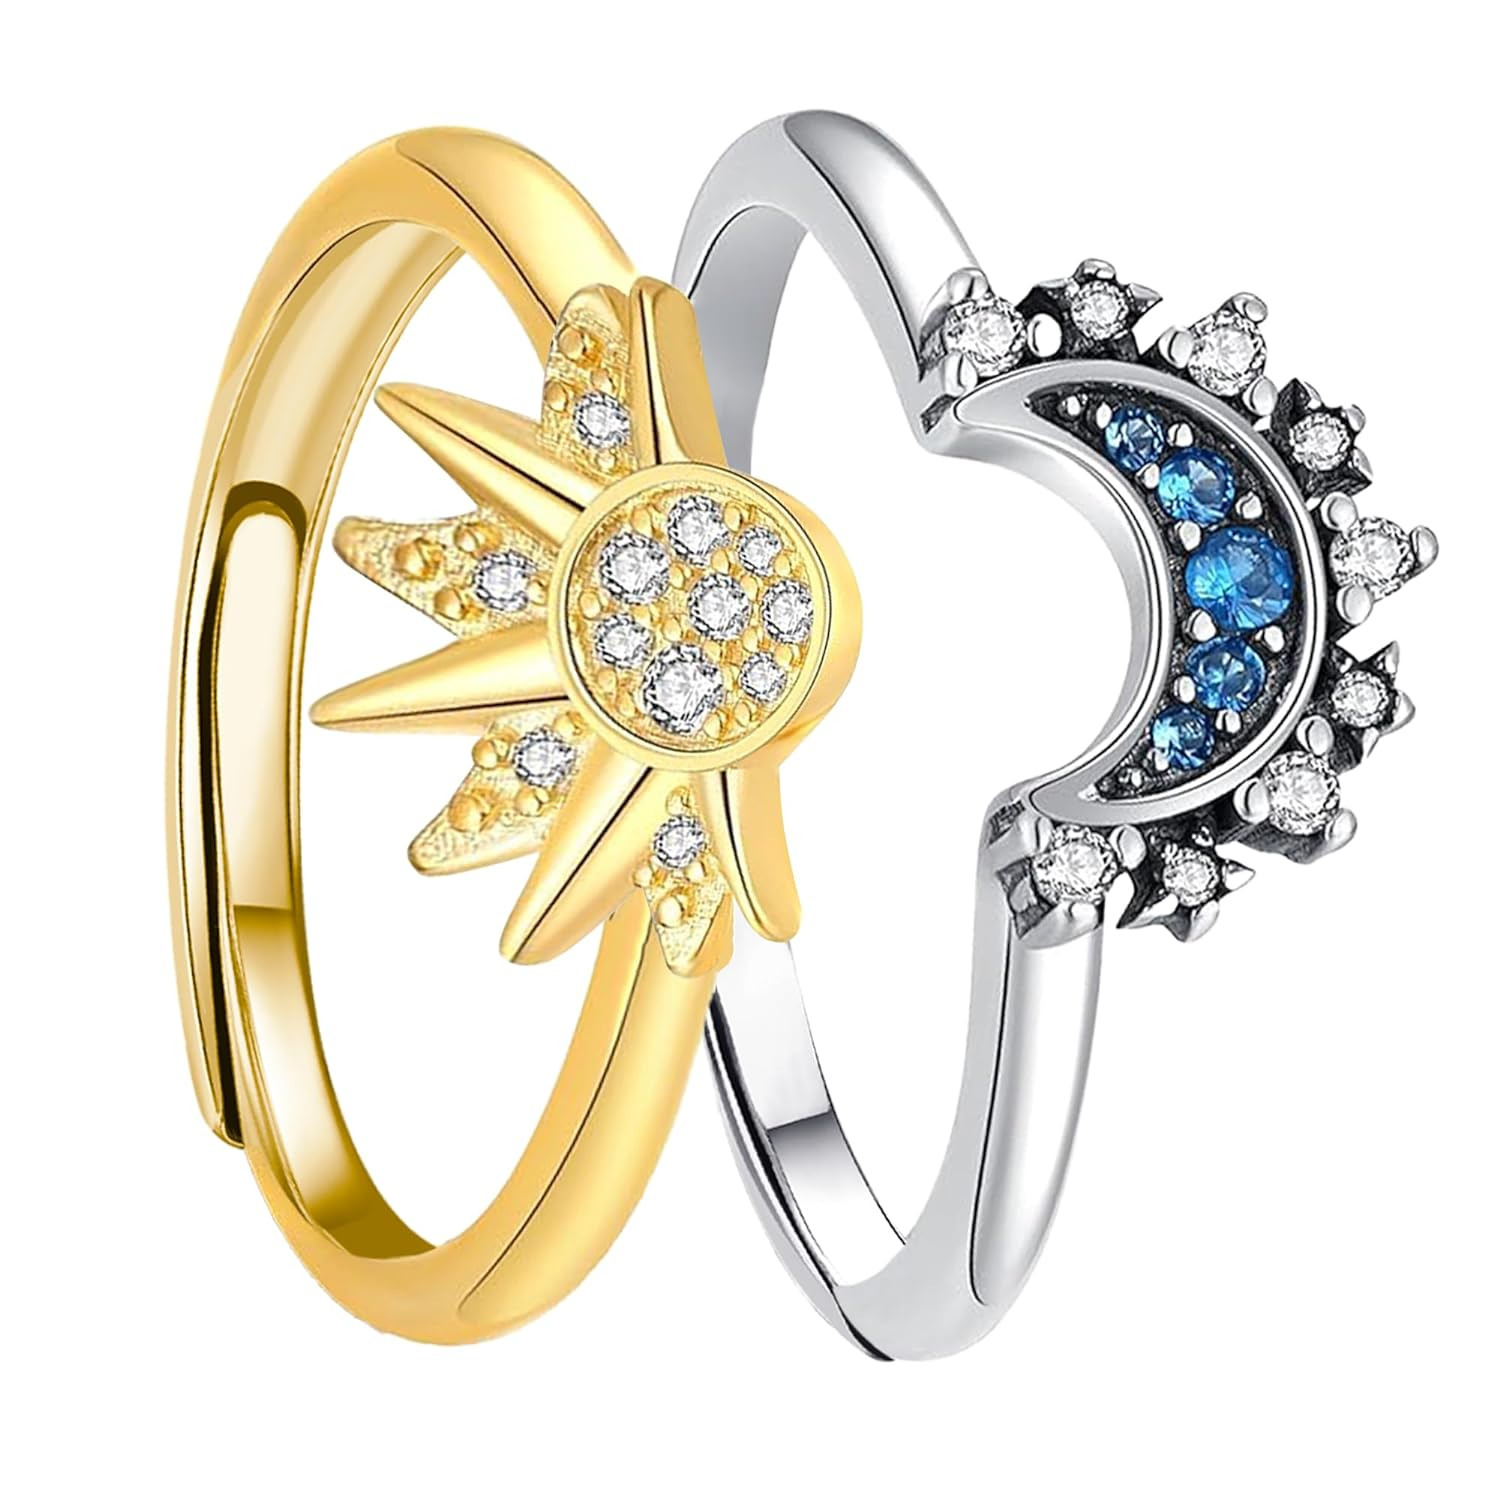 DAYANEY Sun and Moon Ring set